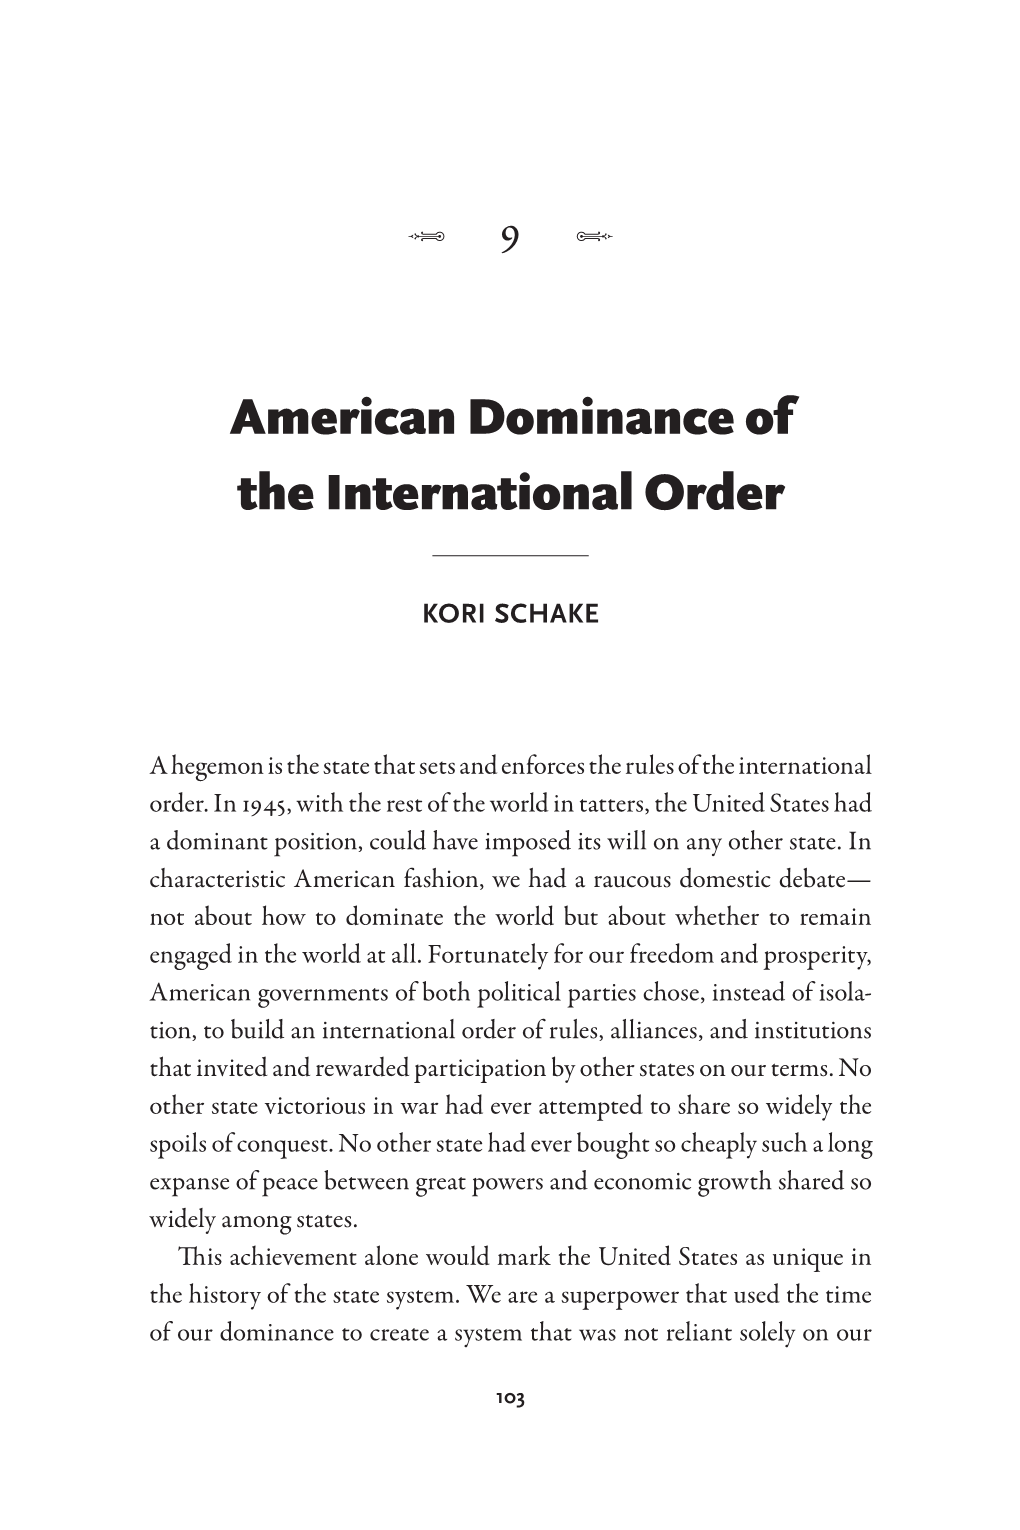 American Dominance of the International Order